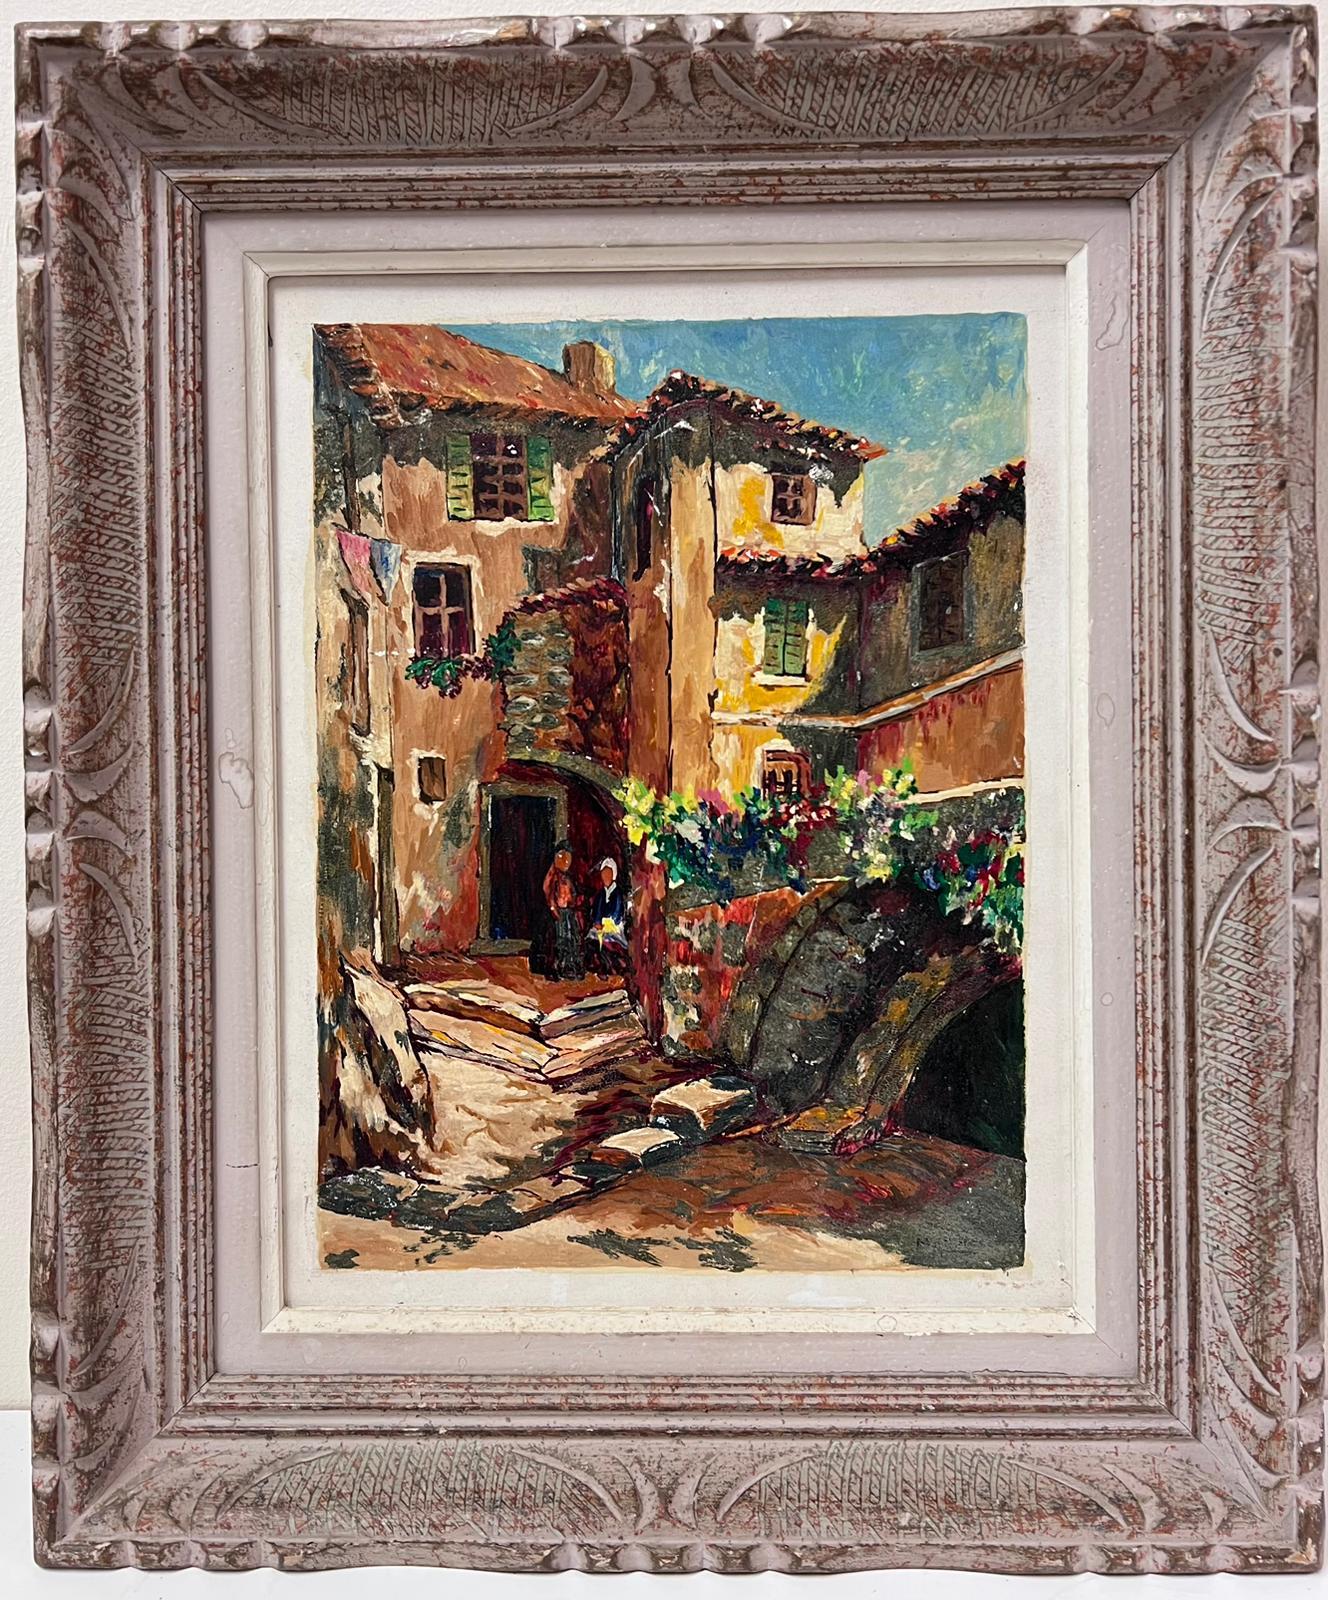 The Provence Cottage
French School, mid 20th century
faint signature
oil painting on board, framed in original 'Montparnasse' style frame. 
framed: 18.5 x 15 inches
board: 15 x 12 inches
provenance: private collection, France
condition: very good